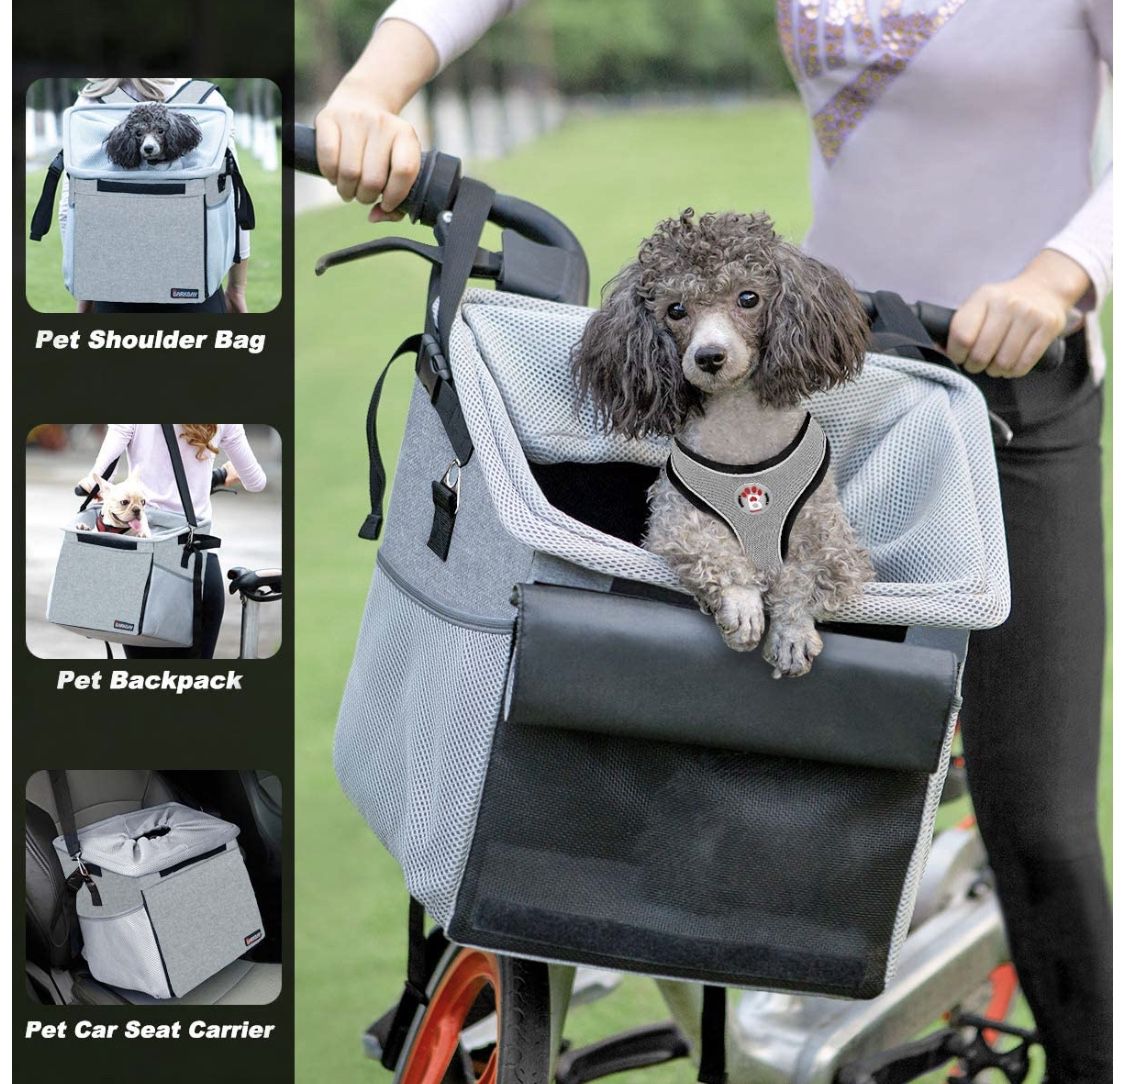 Pet Carrier Bicycle Basket Bag Pet Carrier/Booster Backpack for Dogs and Cats